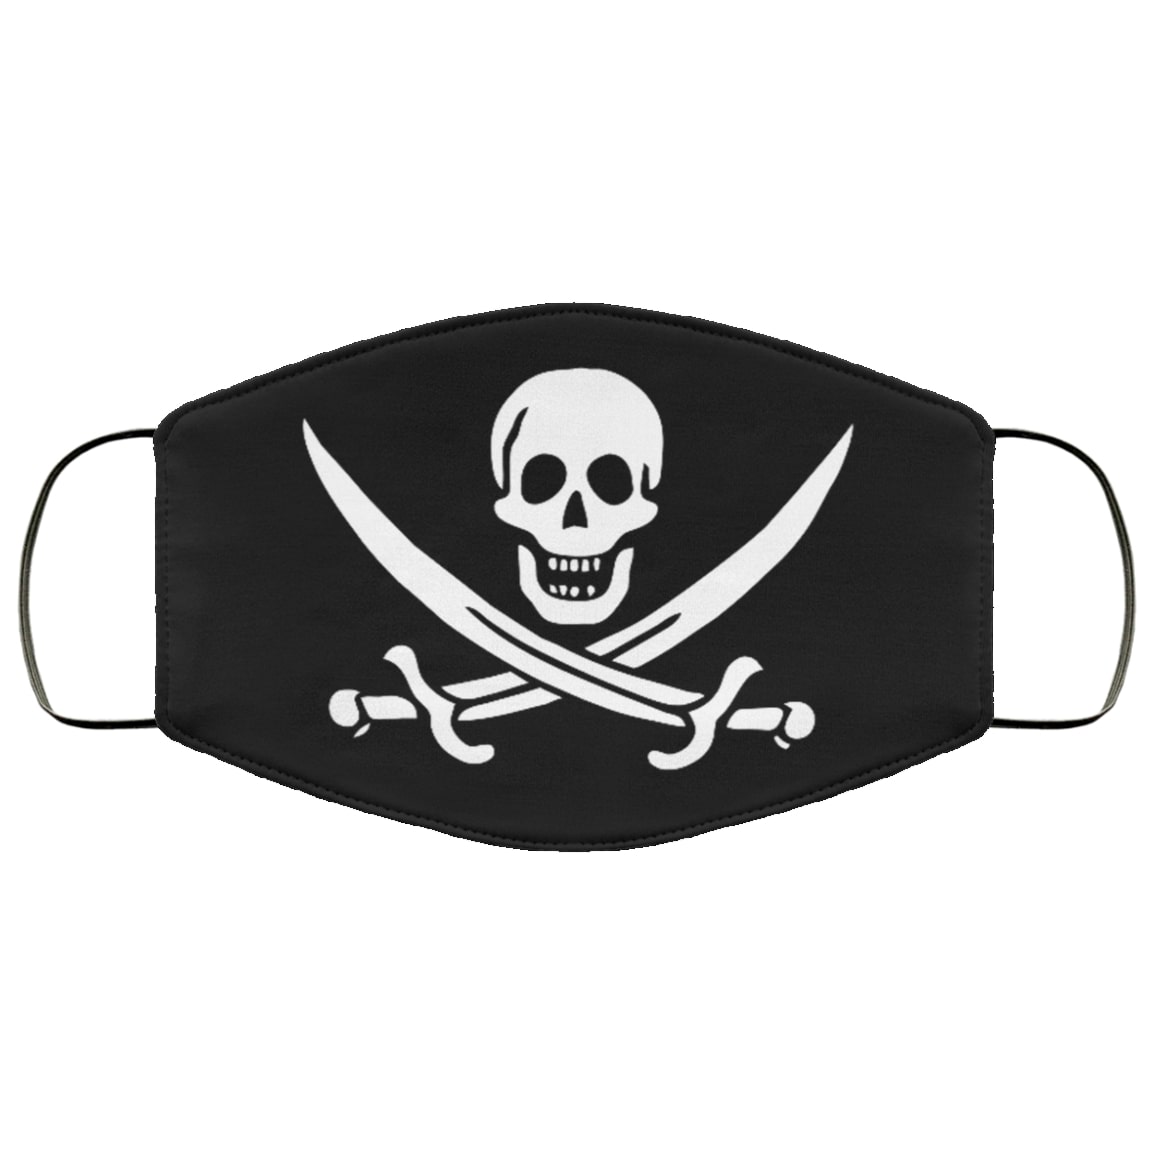 Jolly roger all over printed face mask 1